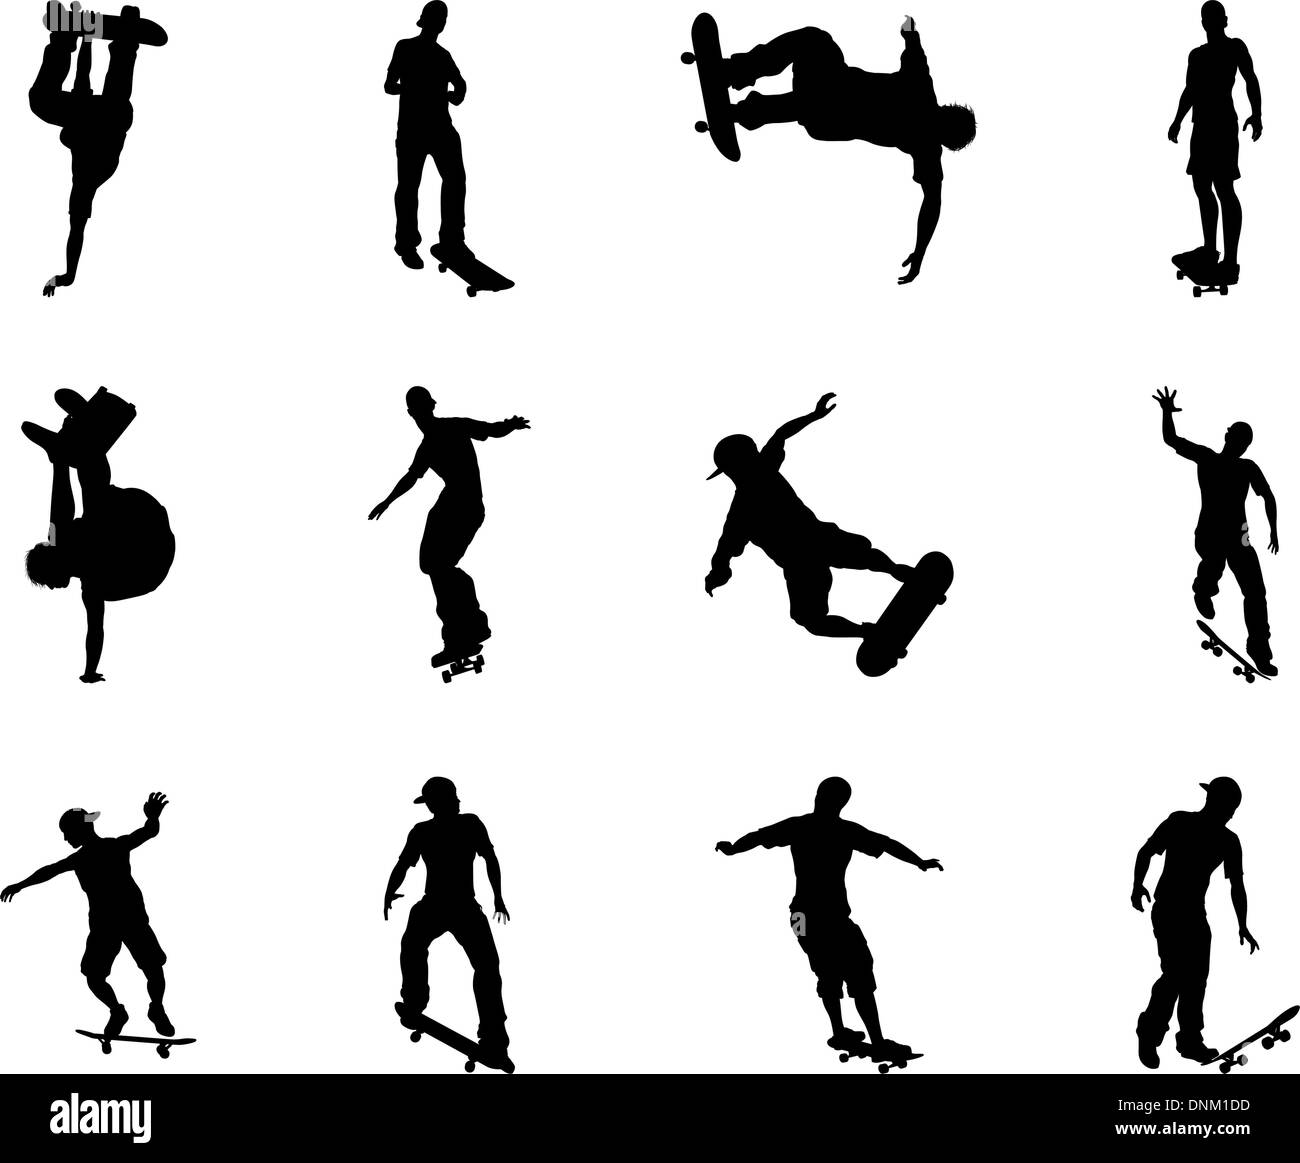 Skateboarders performing lots of tricks on their boards. Very high quality detailed skating skateboarder silhouette outlines. Stock Vector